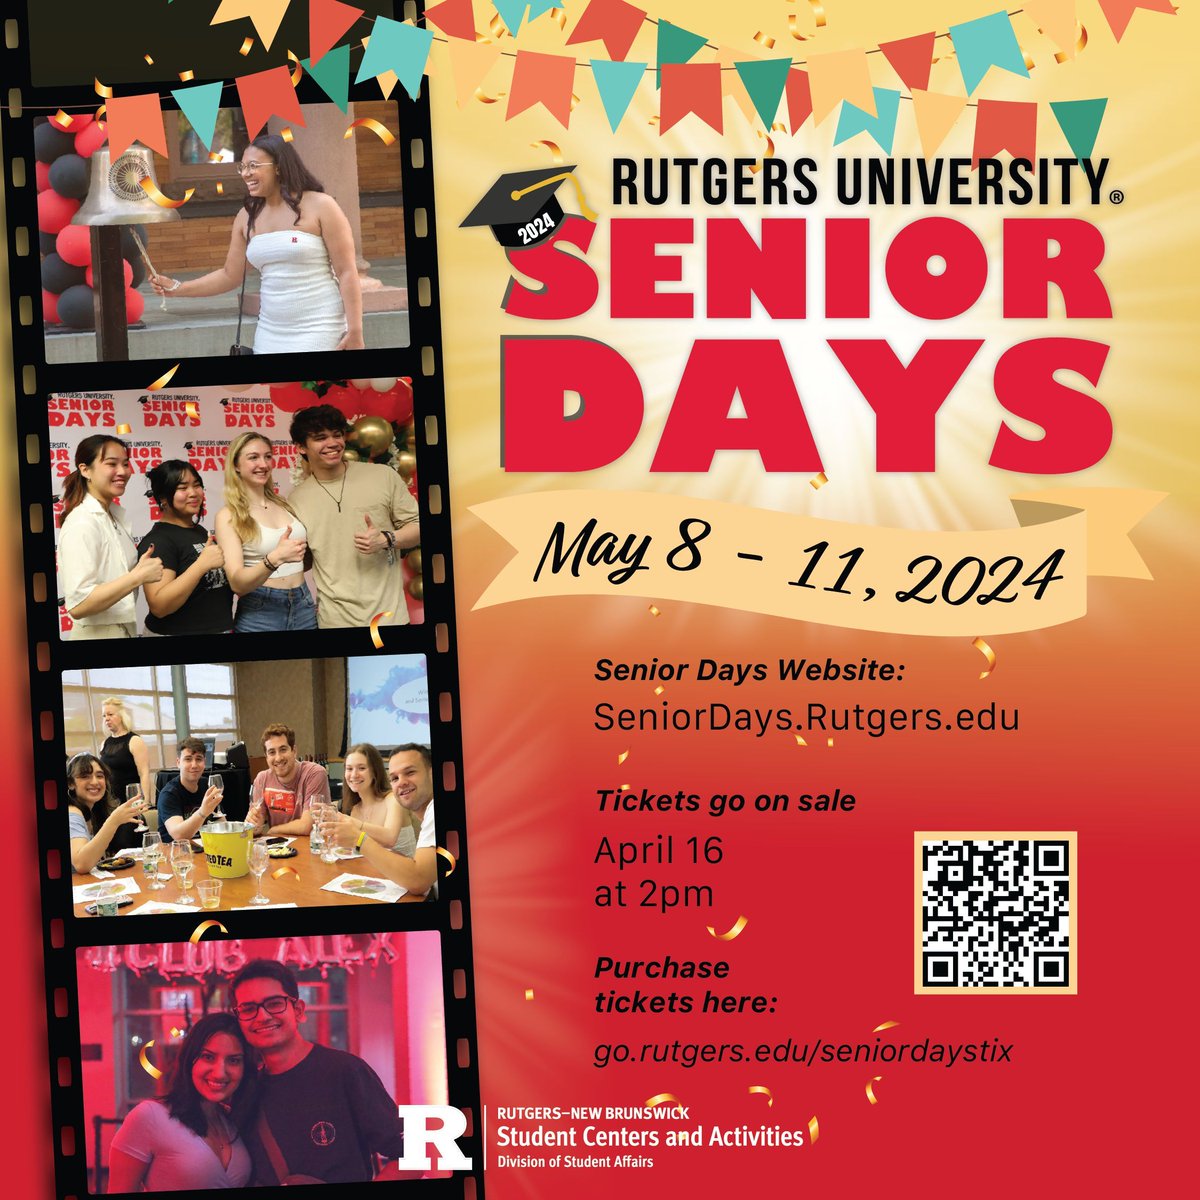 🎓 Calling the Class of 2024! Senior Days will take place from Wednesday, May 8 through Saturday, May 11, 2024. Tickets for Senior Days events will be sold online beginning on Tuesday, April 16 at 2:00pm. Learn more about the events here: go.rutgers.edu/seniordays2024